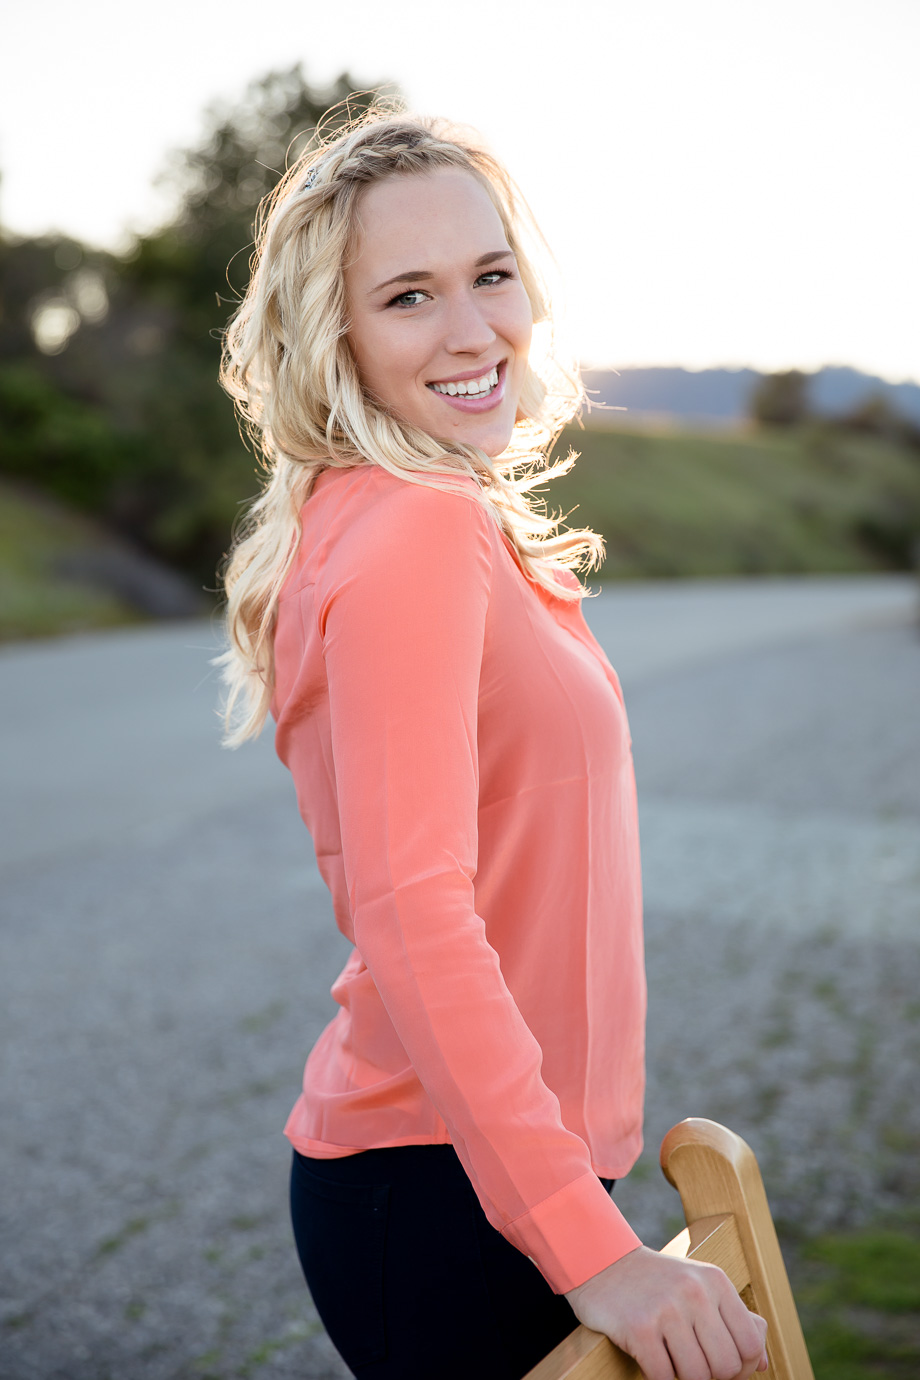 Beautiful portrait for Stefanie under natural lighting - bay area engagement photography